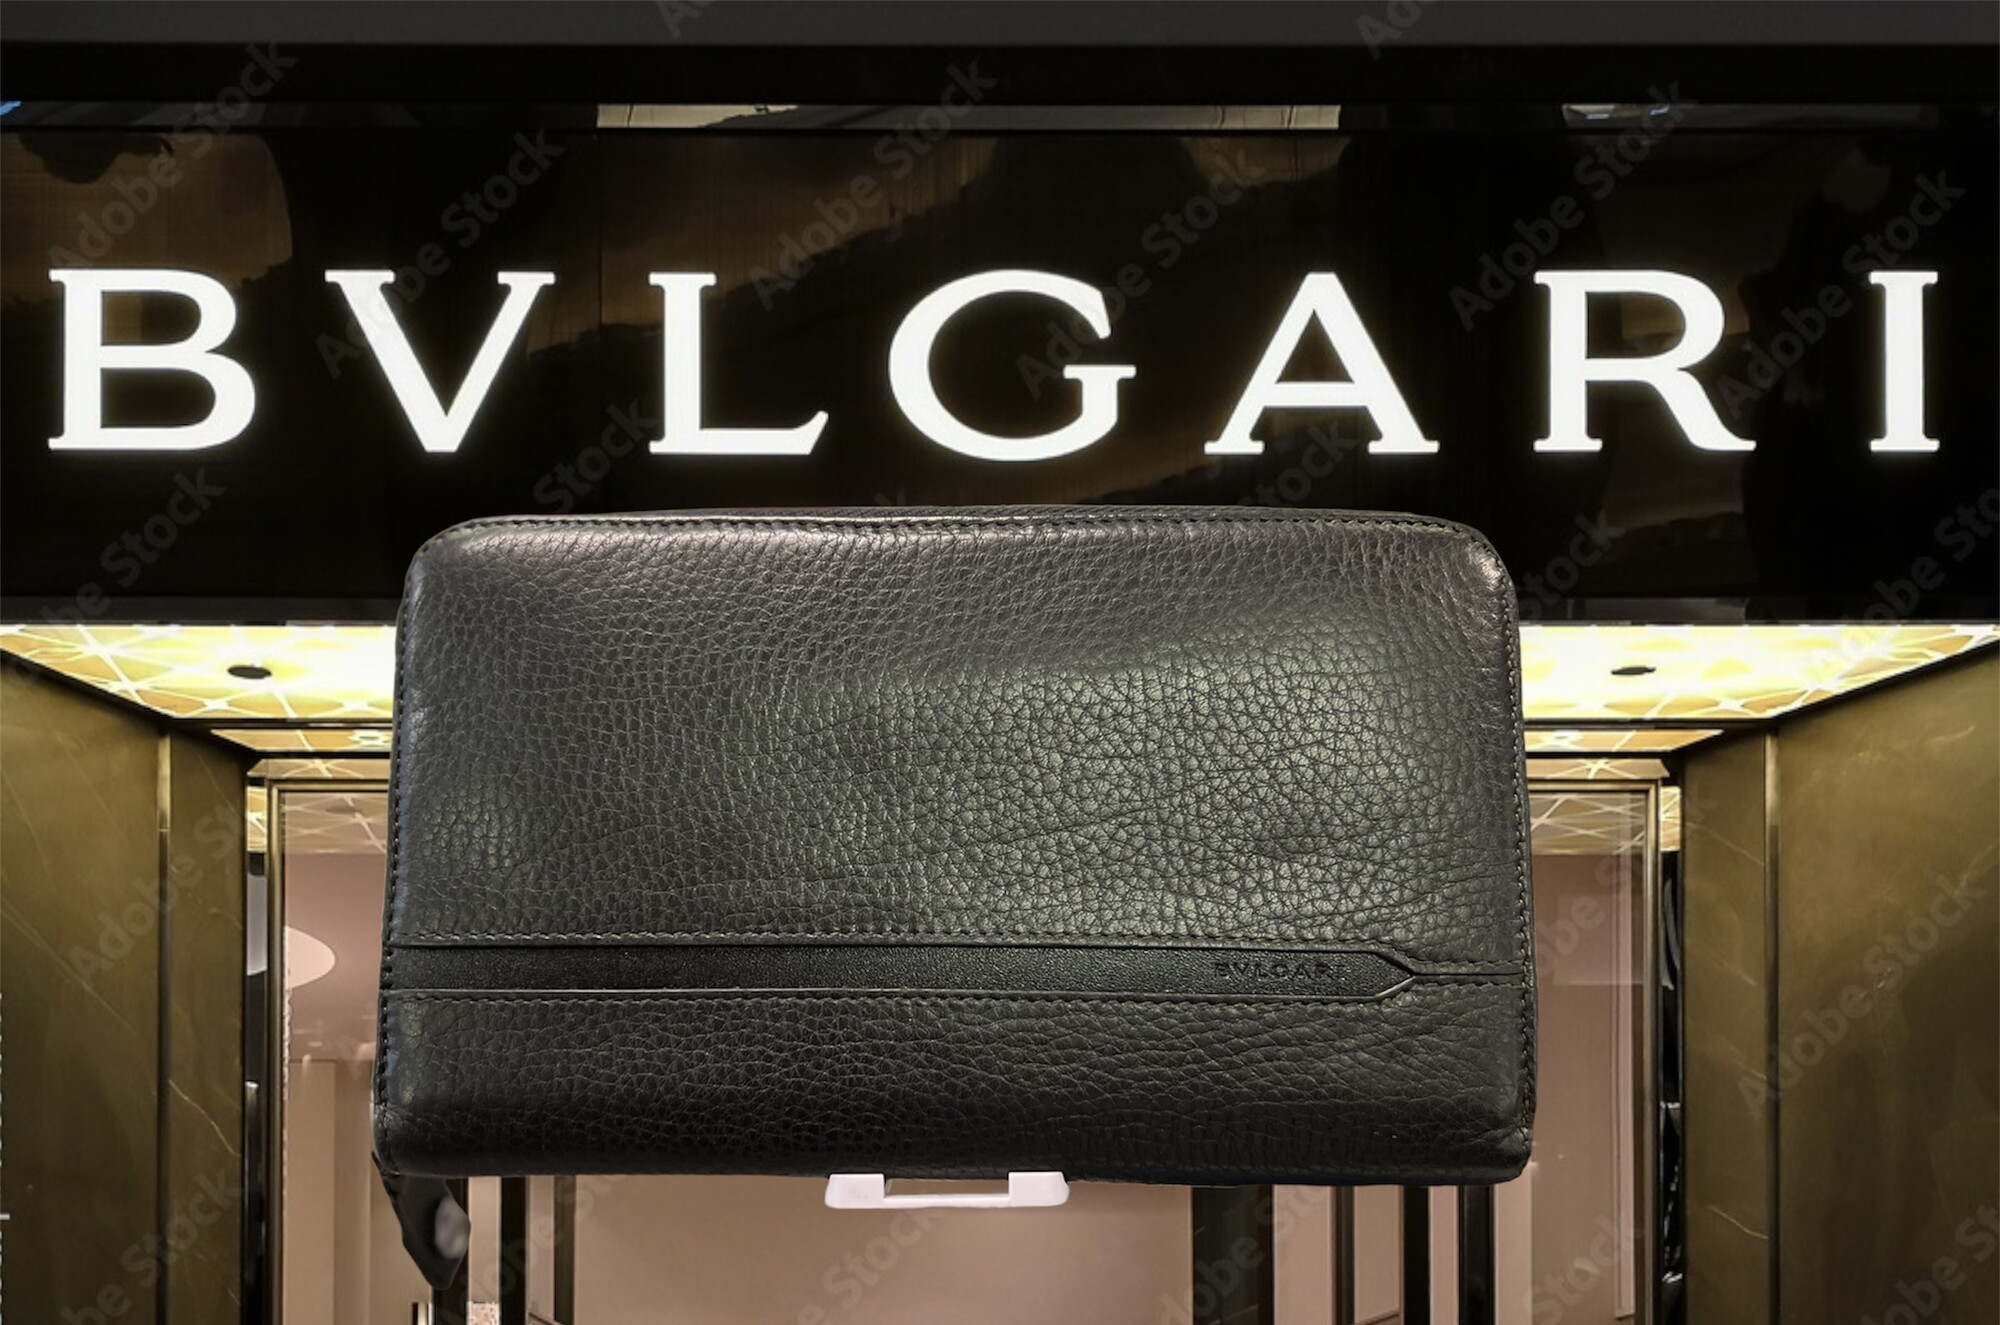 BVLGARI
Bvlgari Black Leather Zip Around Wallet with silver hardware, trim leather, interior card holder pocket, leather lining, interior three compartments pocket and zipper closure.
authenticity number: FG-F14-36968
About the Manufacturer:
Bvlgari-Greek silversmith Sotirios Voulgaris arrived in Rome in 1881 and set up his own shop there in 1884, calling it Bulgari, an Italianization of his last name (eventually spelled BVLGARI, using the classical Latin alphabet in a nod to ancient Roman culture). In 1905, he opened the company’s flagship boutique on Rome’s Via dei Condotti. Since then, BVLGARI has looked to Rome as a source of reference for its fanciful and decidedly romantic designs for necklaces, bracelets, earrings and other accessories.
This wallet is in beautiful used condition, soft black leather, well cared fore.
This wallet retails for $710.00 New.